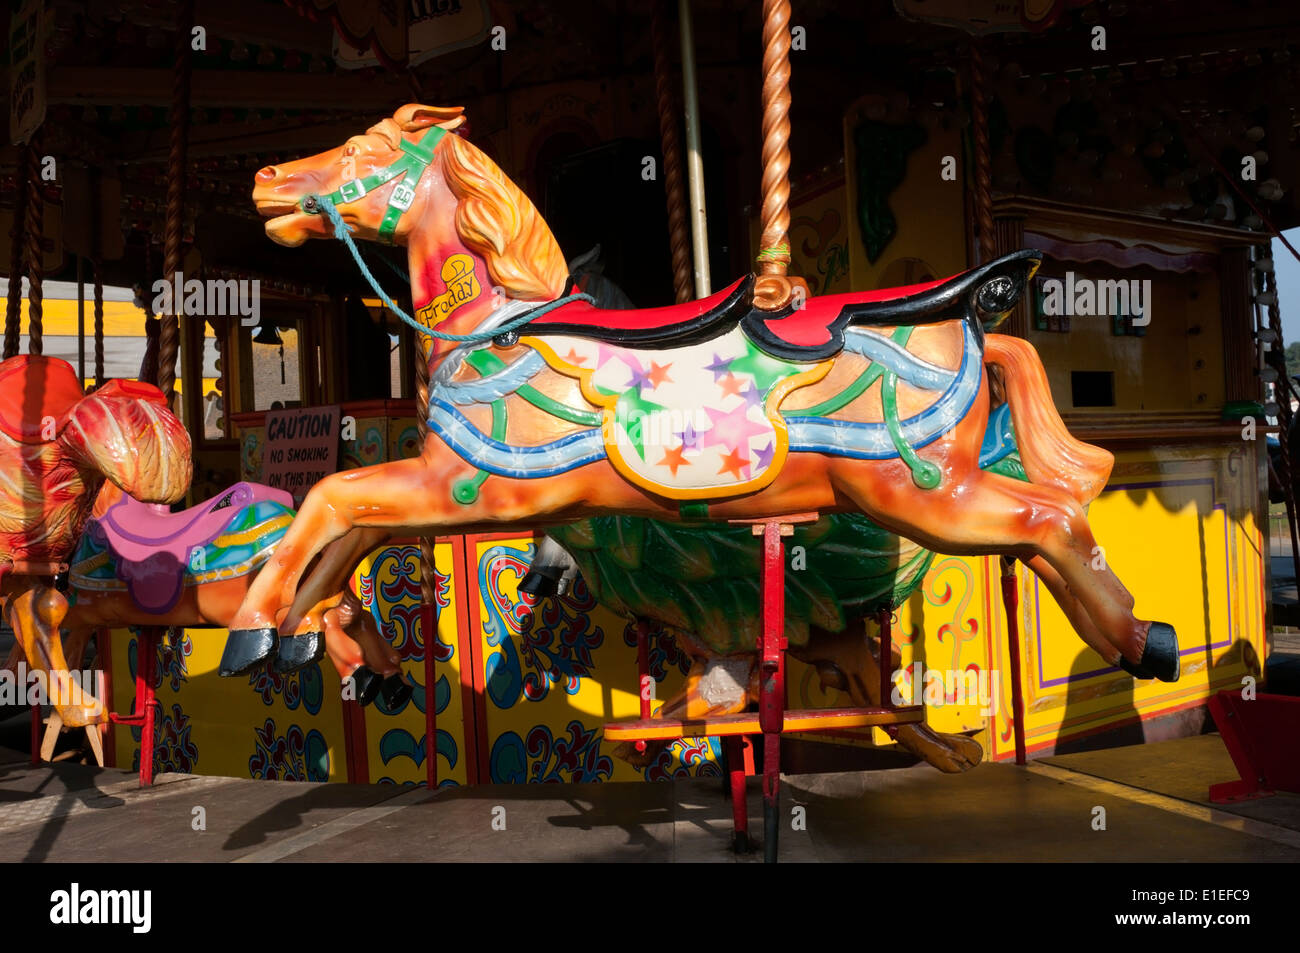 An old fashioned galloping horses fairground ride in the funfair at Hunstanton, Norfolk. Stock Photo